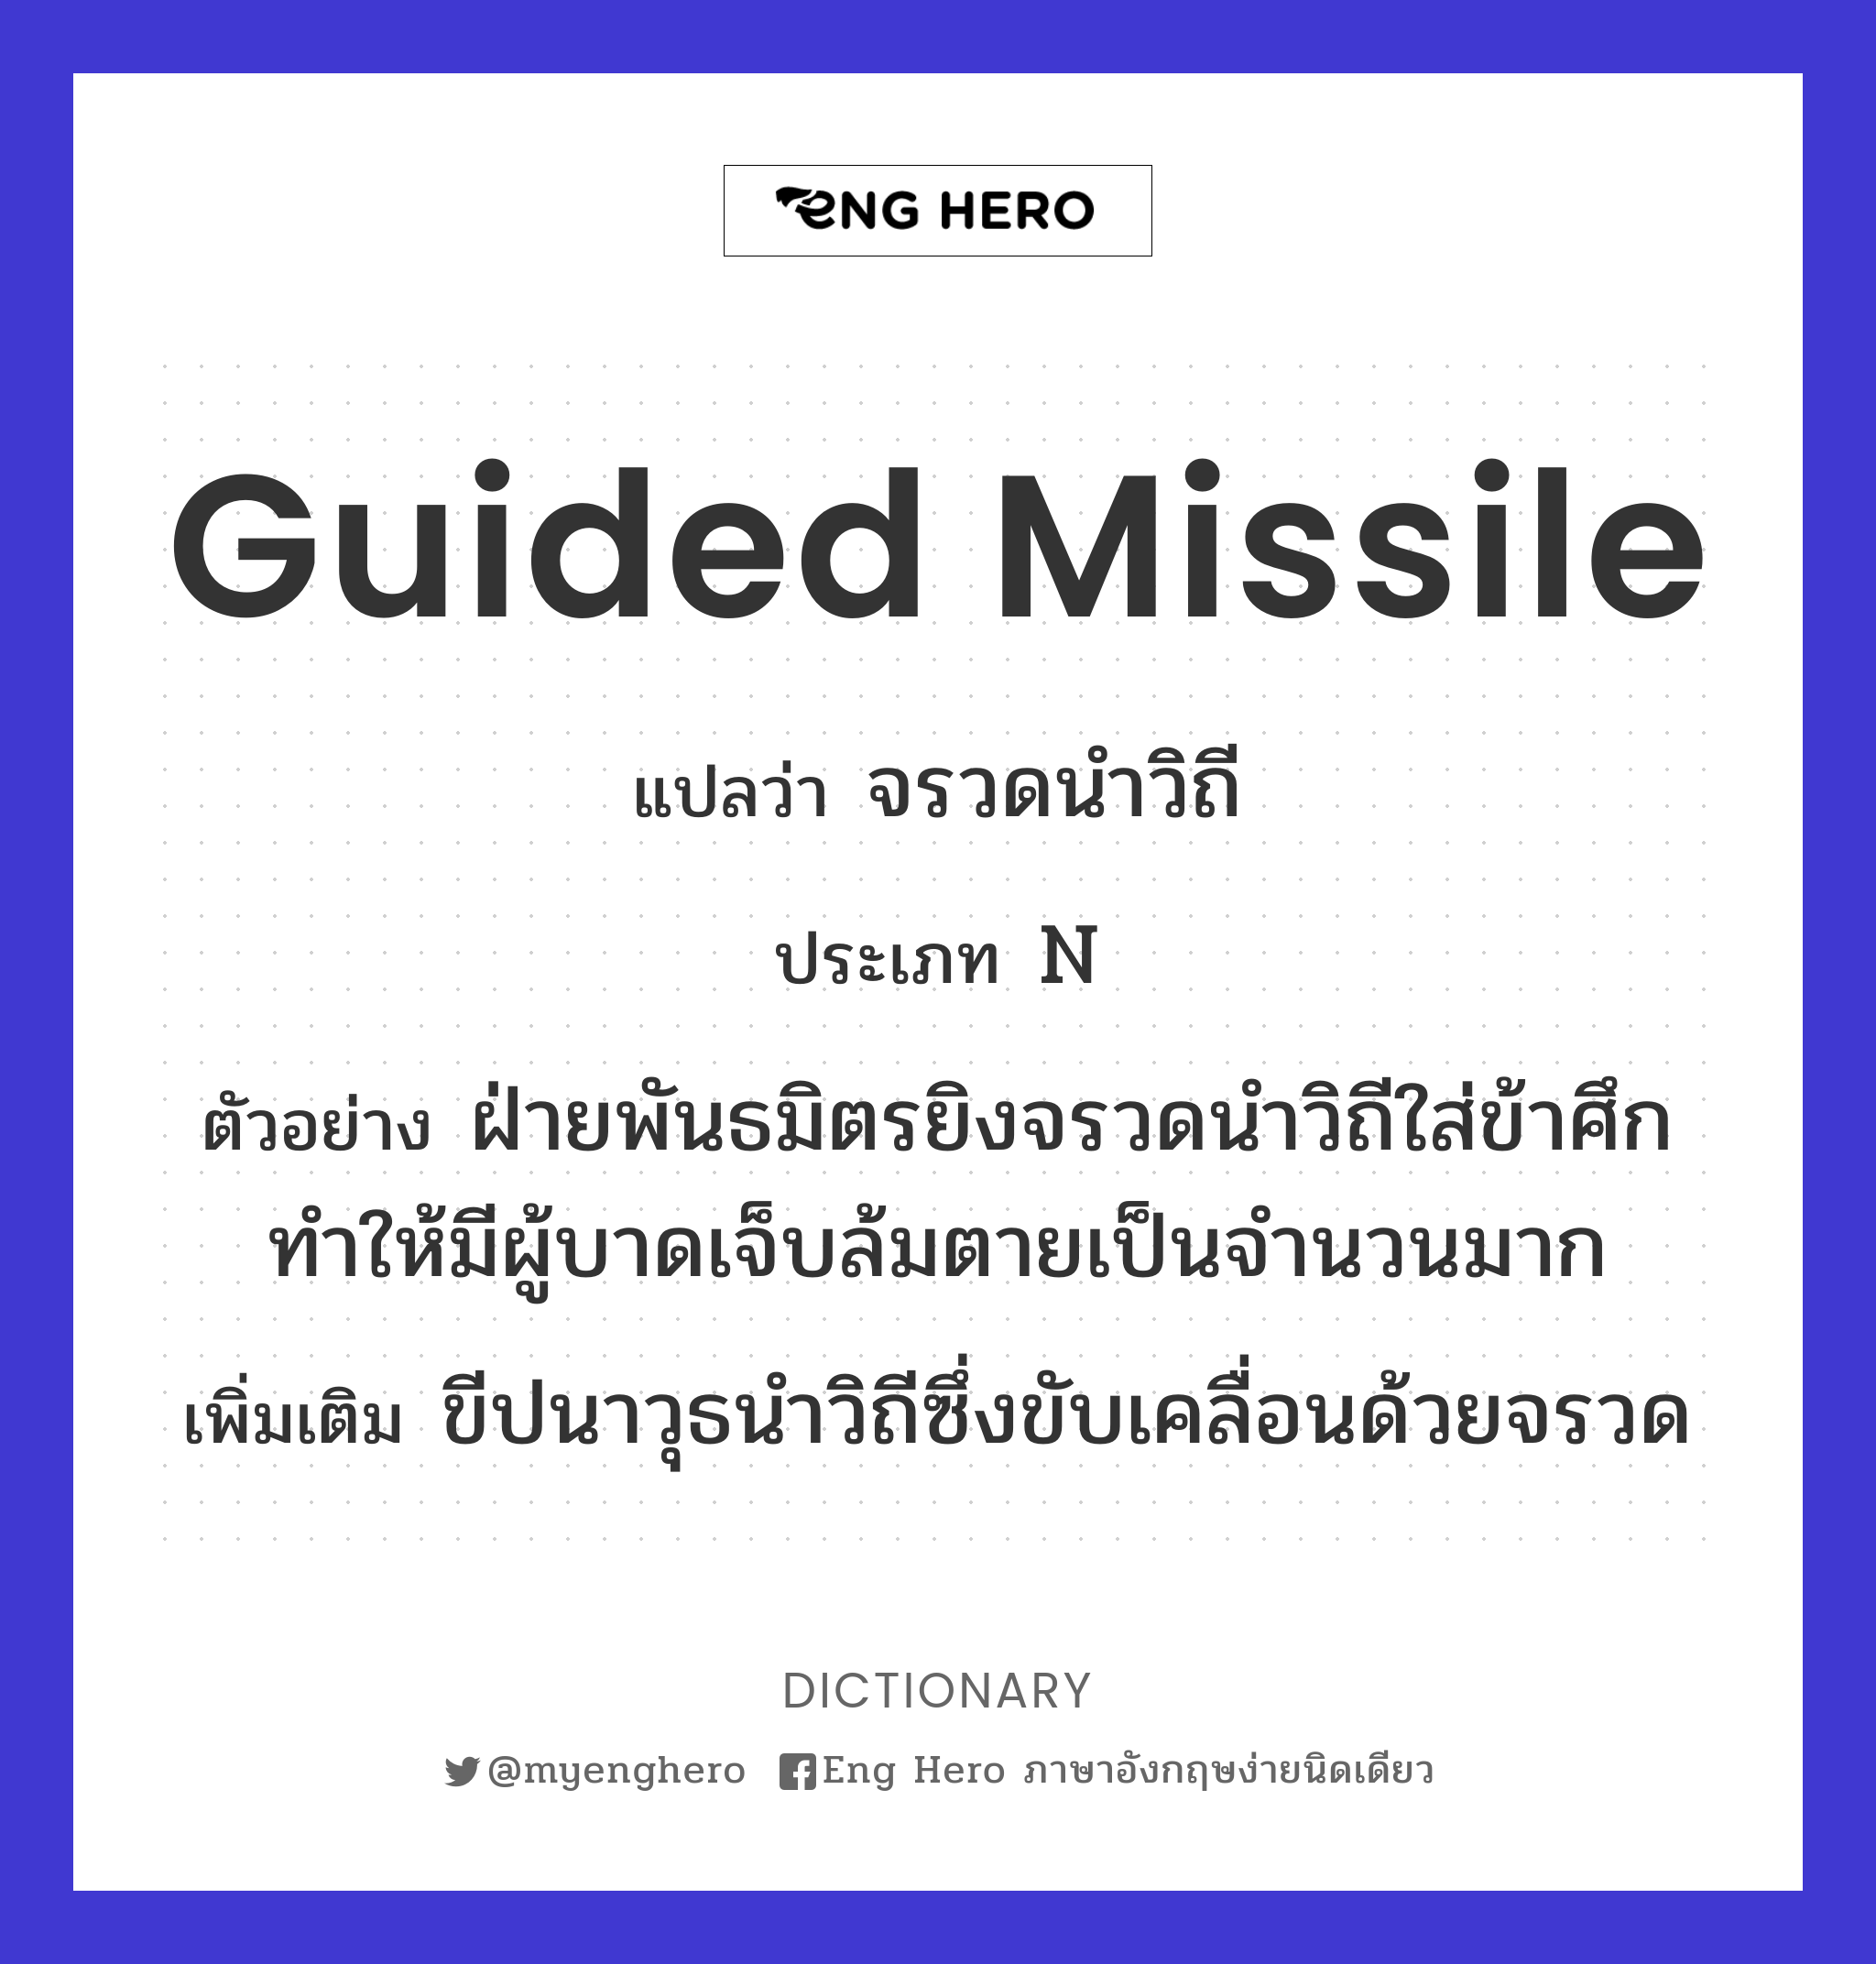 guided missile